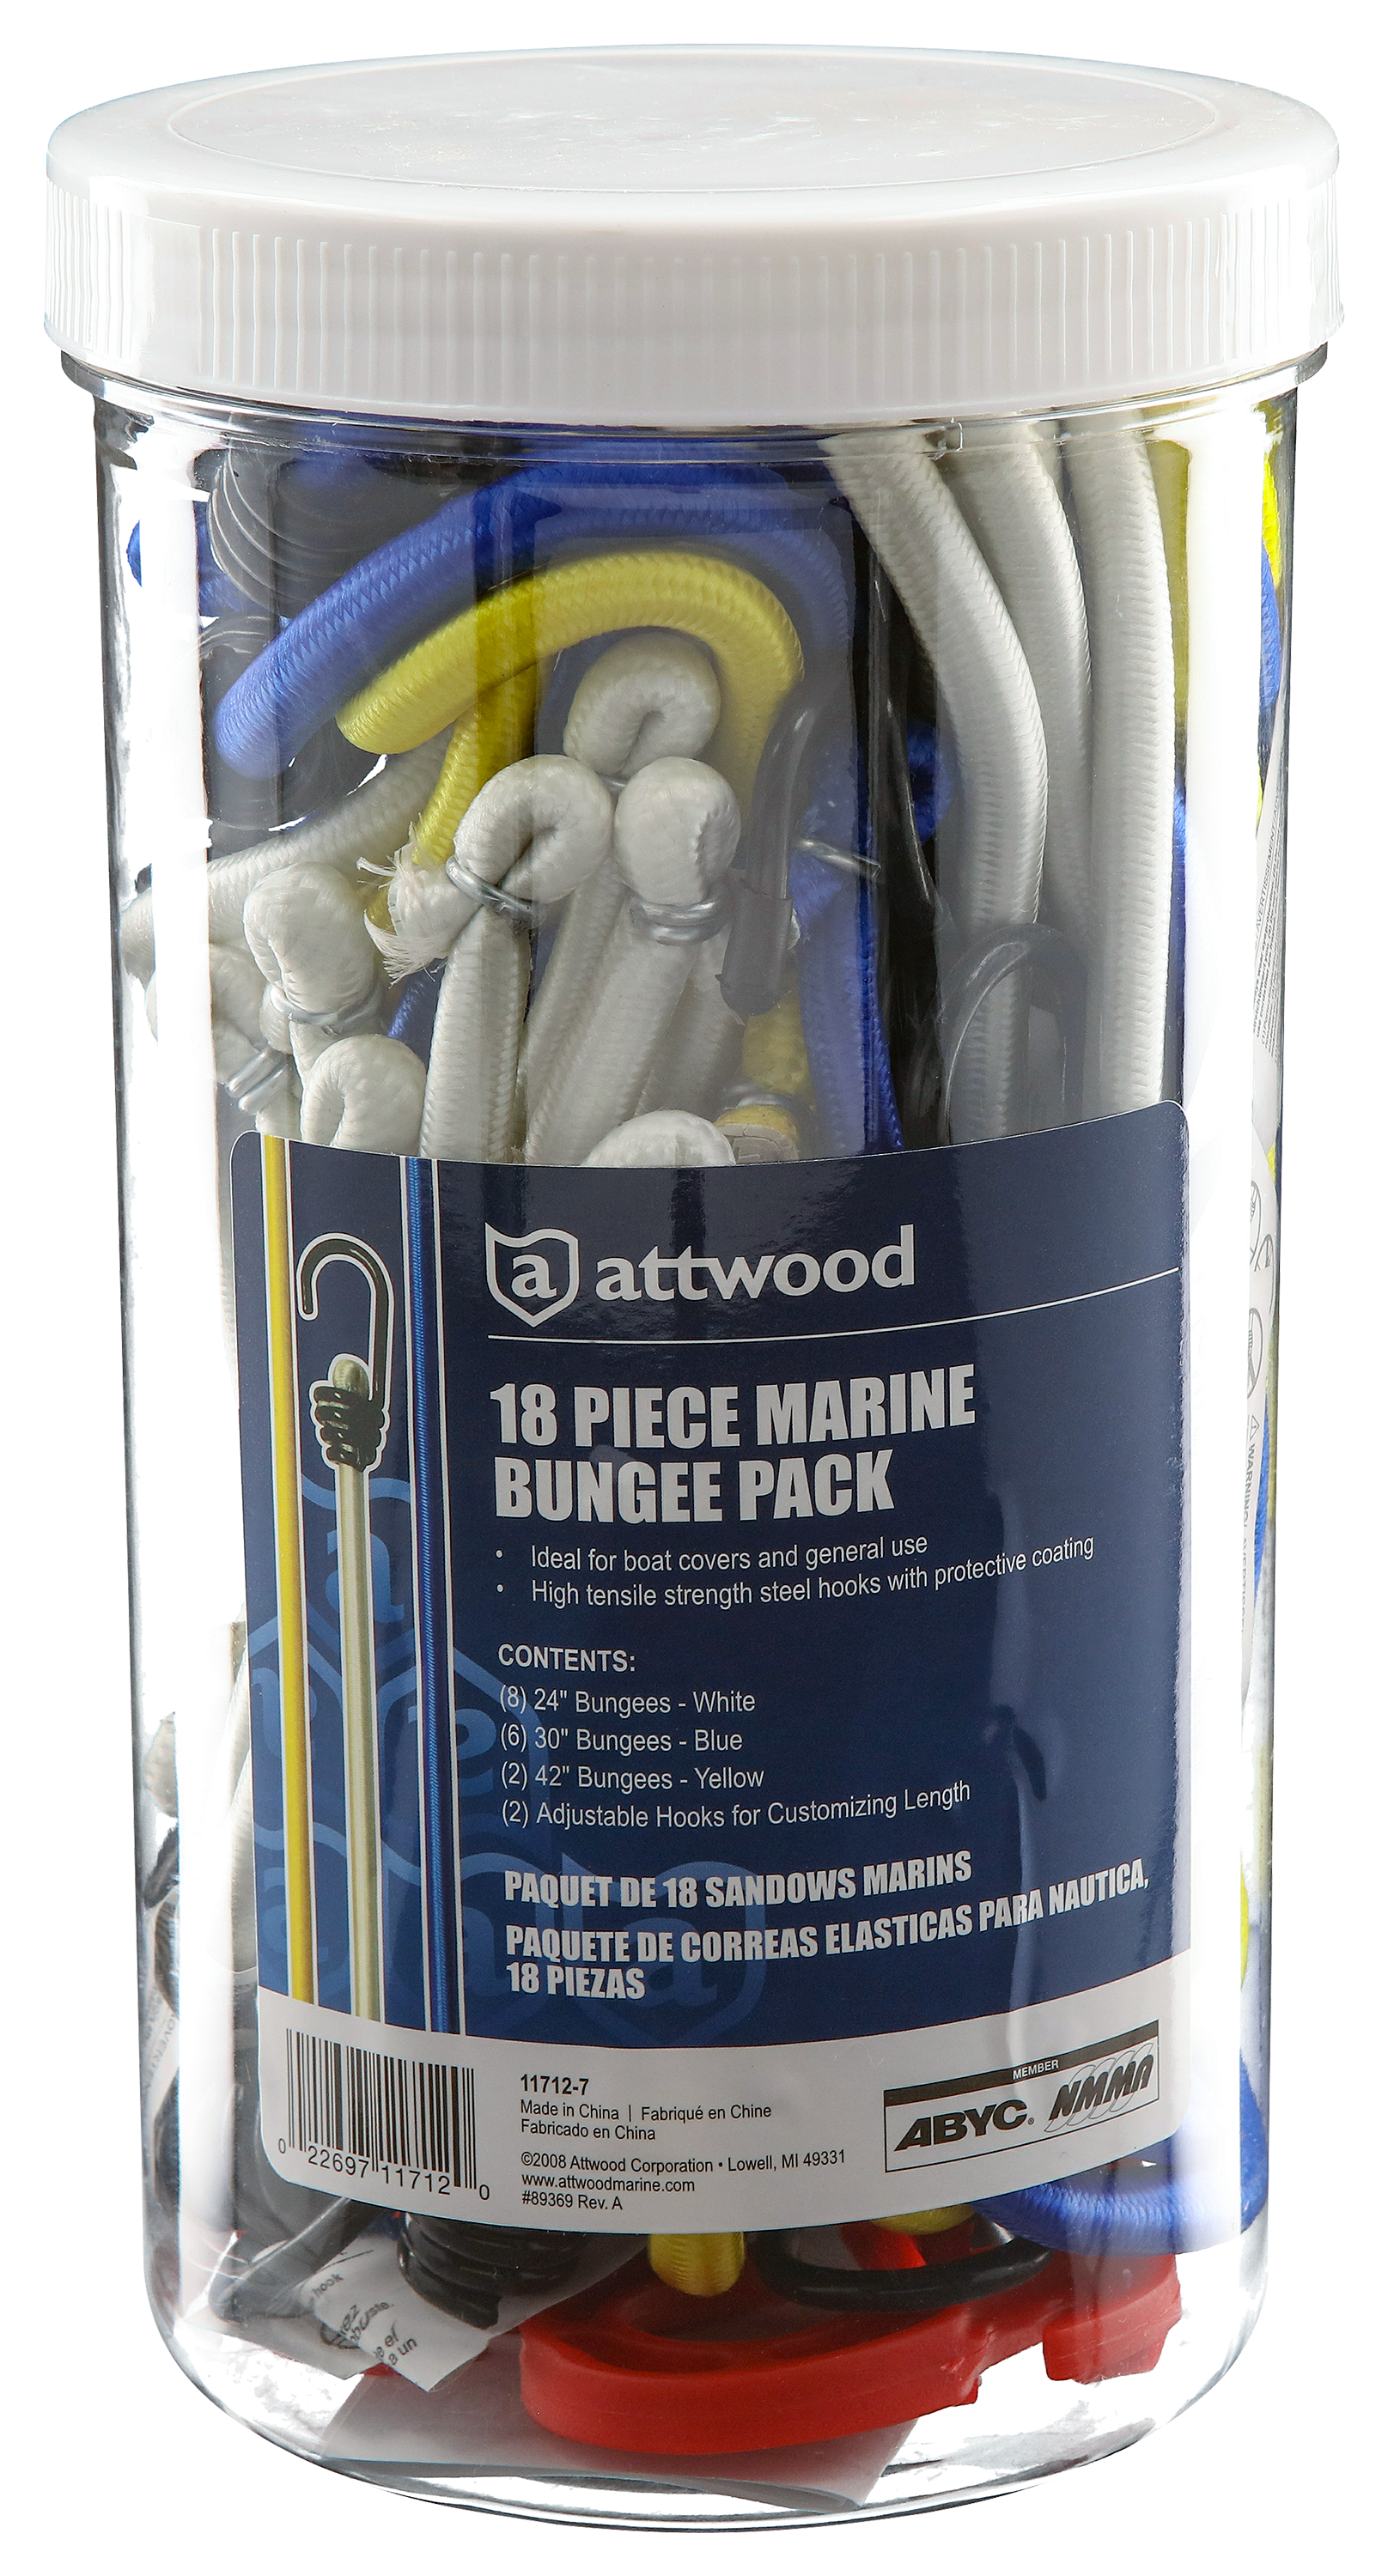 Attwood Bungee Cord Pack